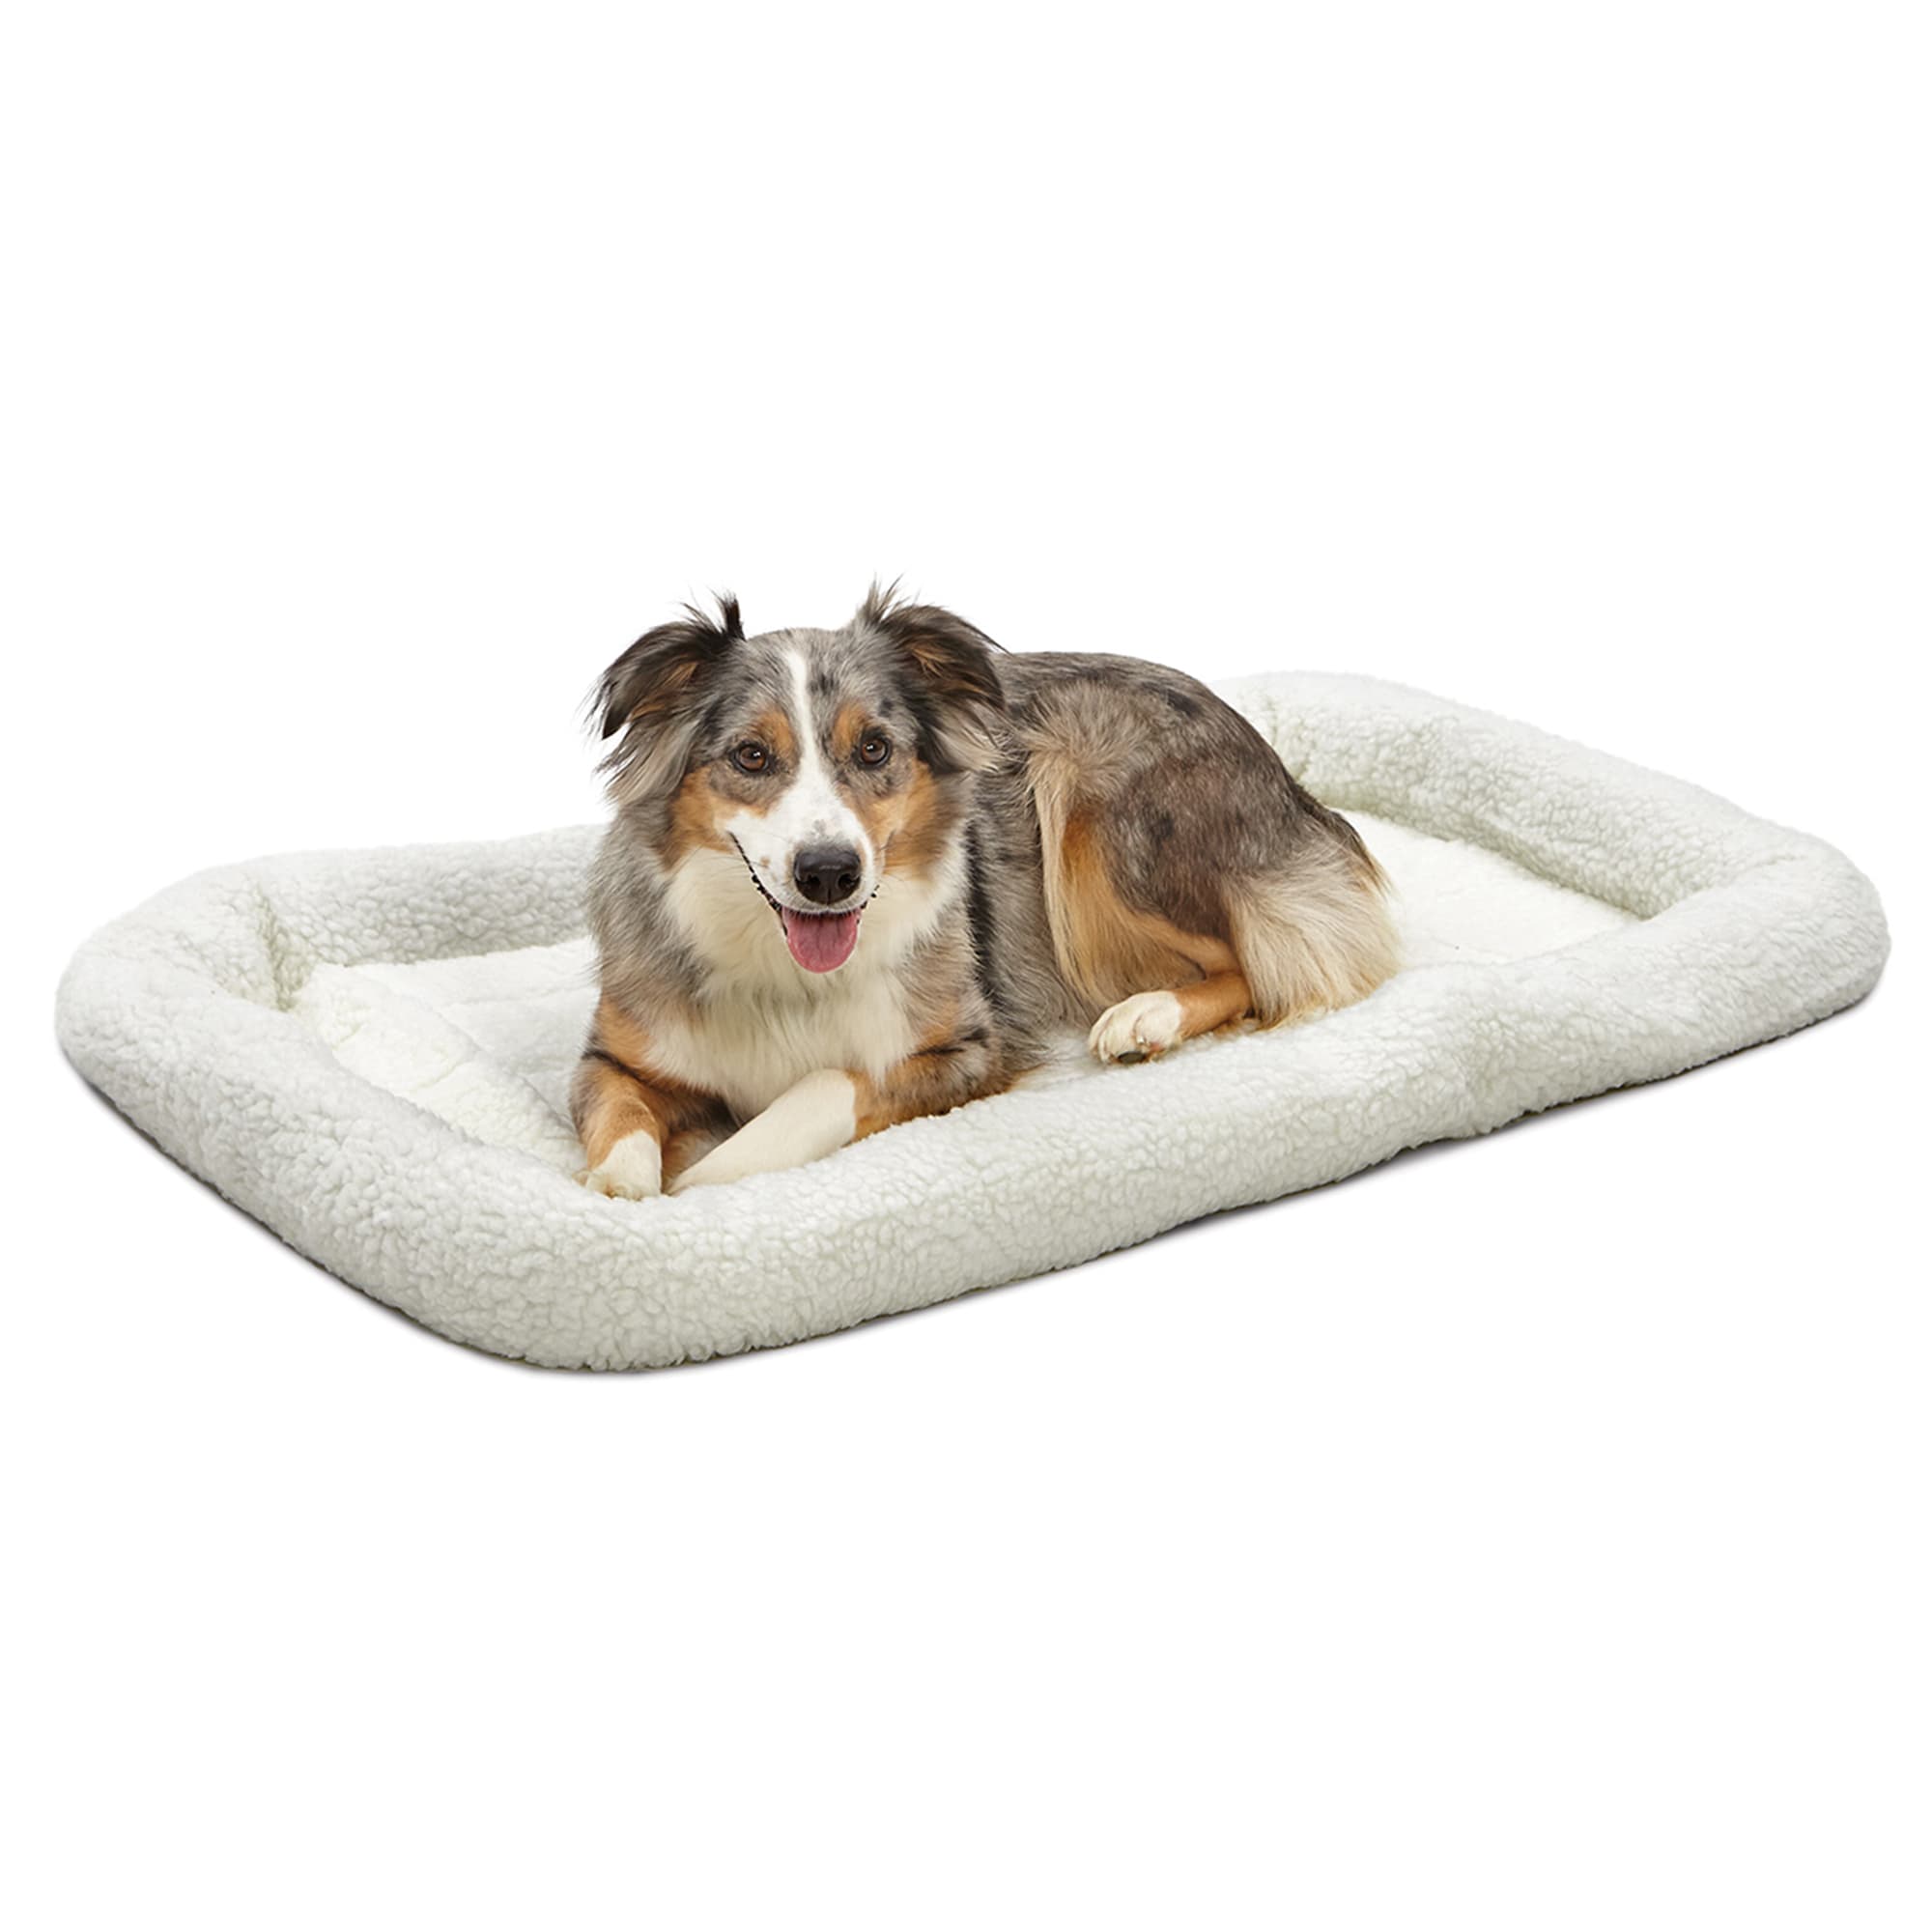 Photos - Bed & Furniture Midwest Quiet Time Bolster White Dog Bed, 42" L X 26" W, X-Large, 